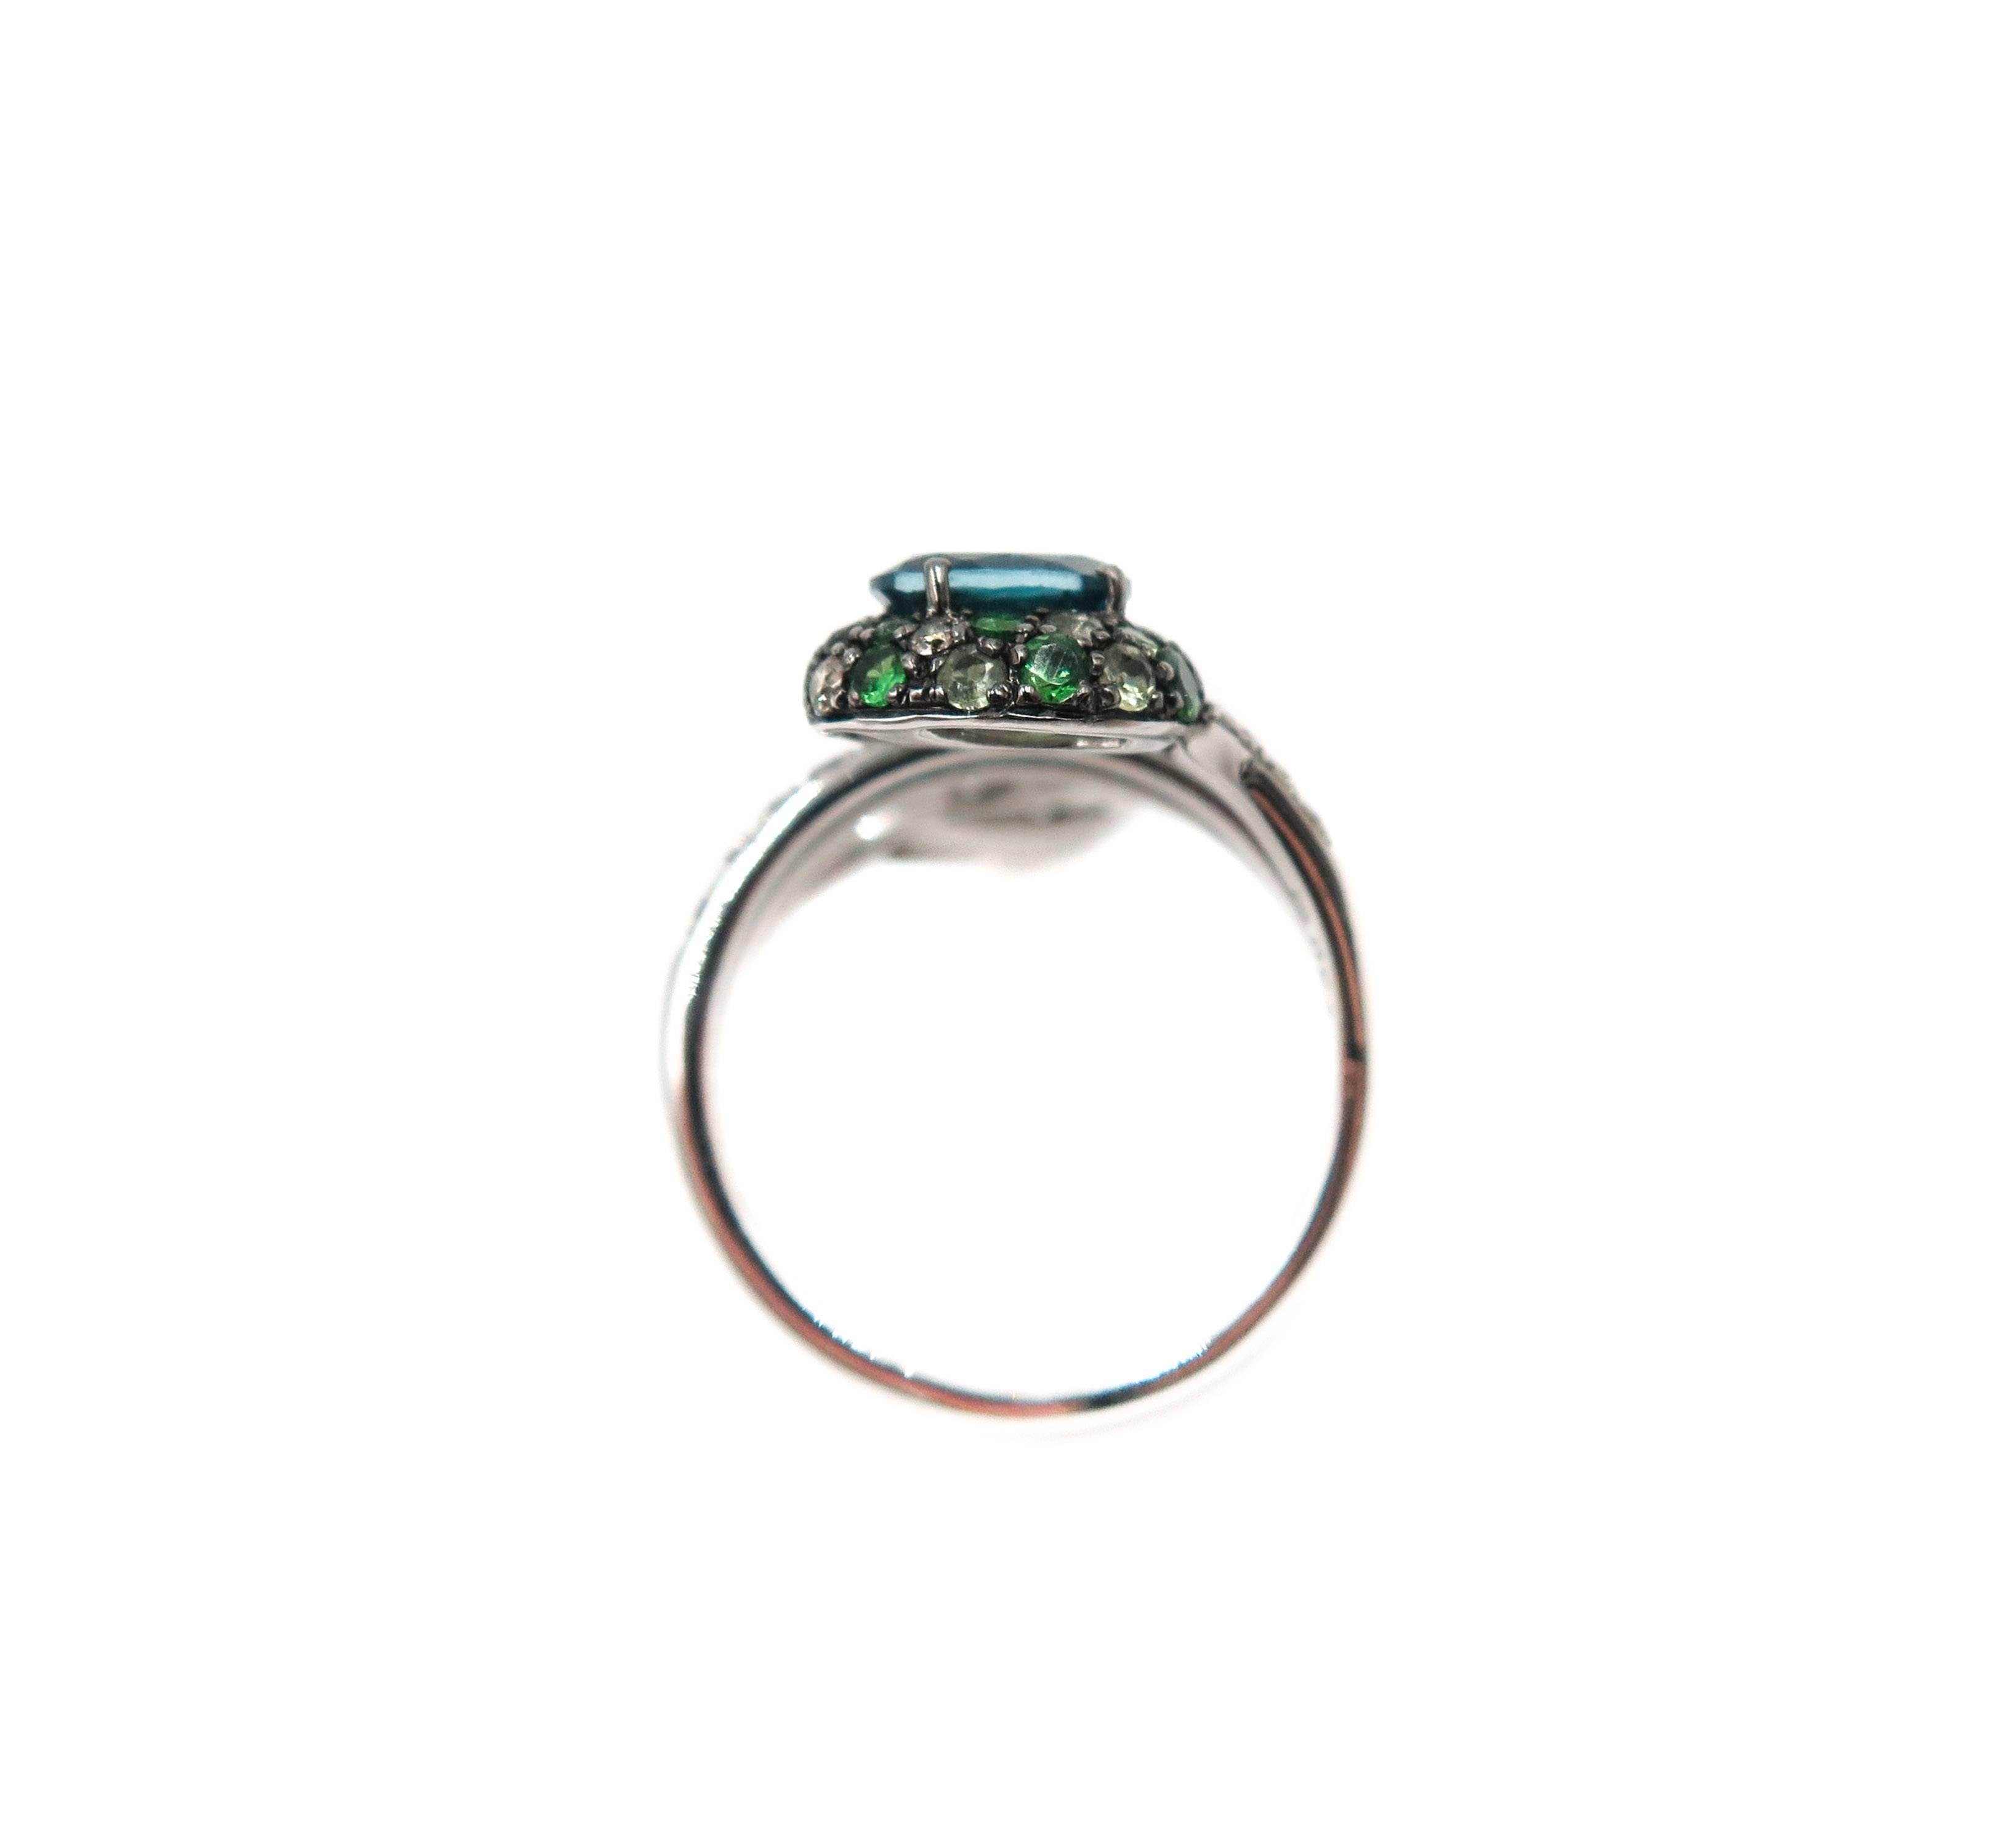 Contemporary Blue, Green Tourmaline and Diamond White Gold Ring by Brumani